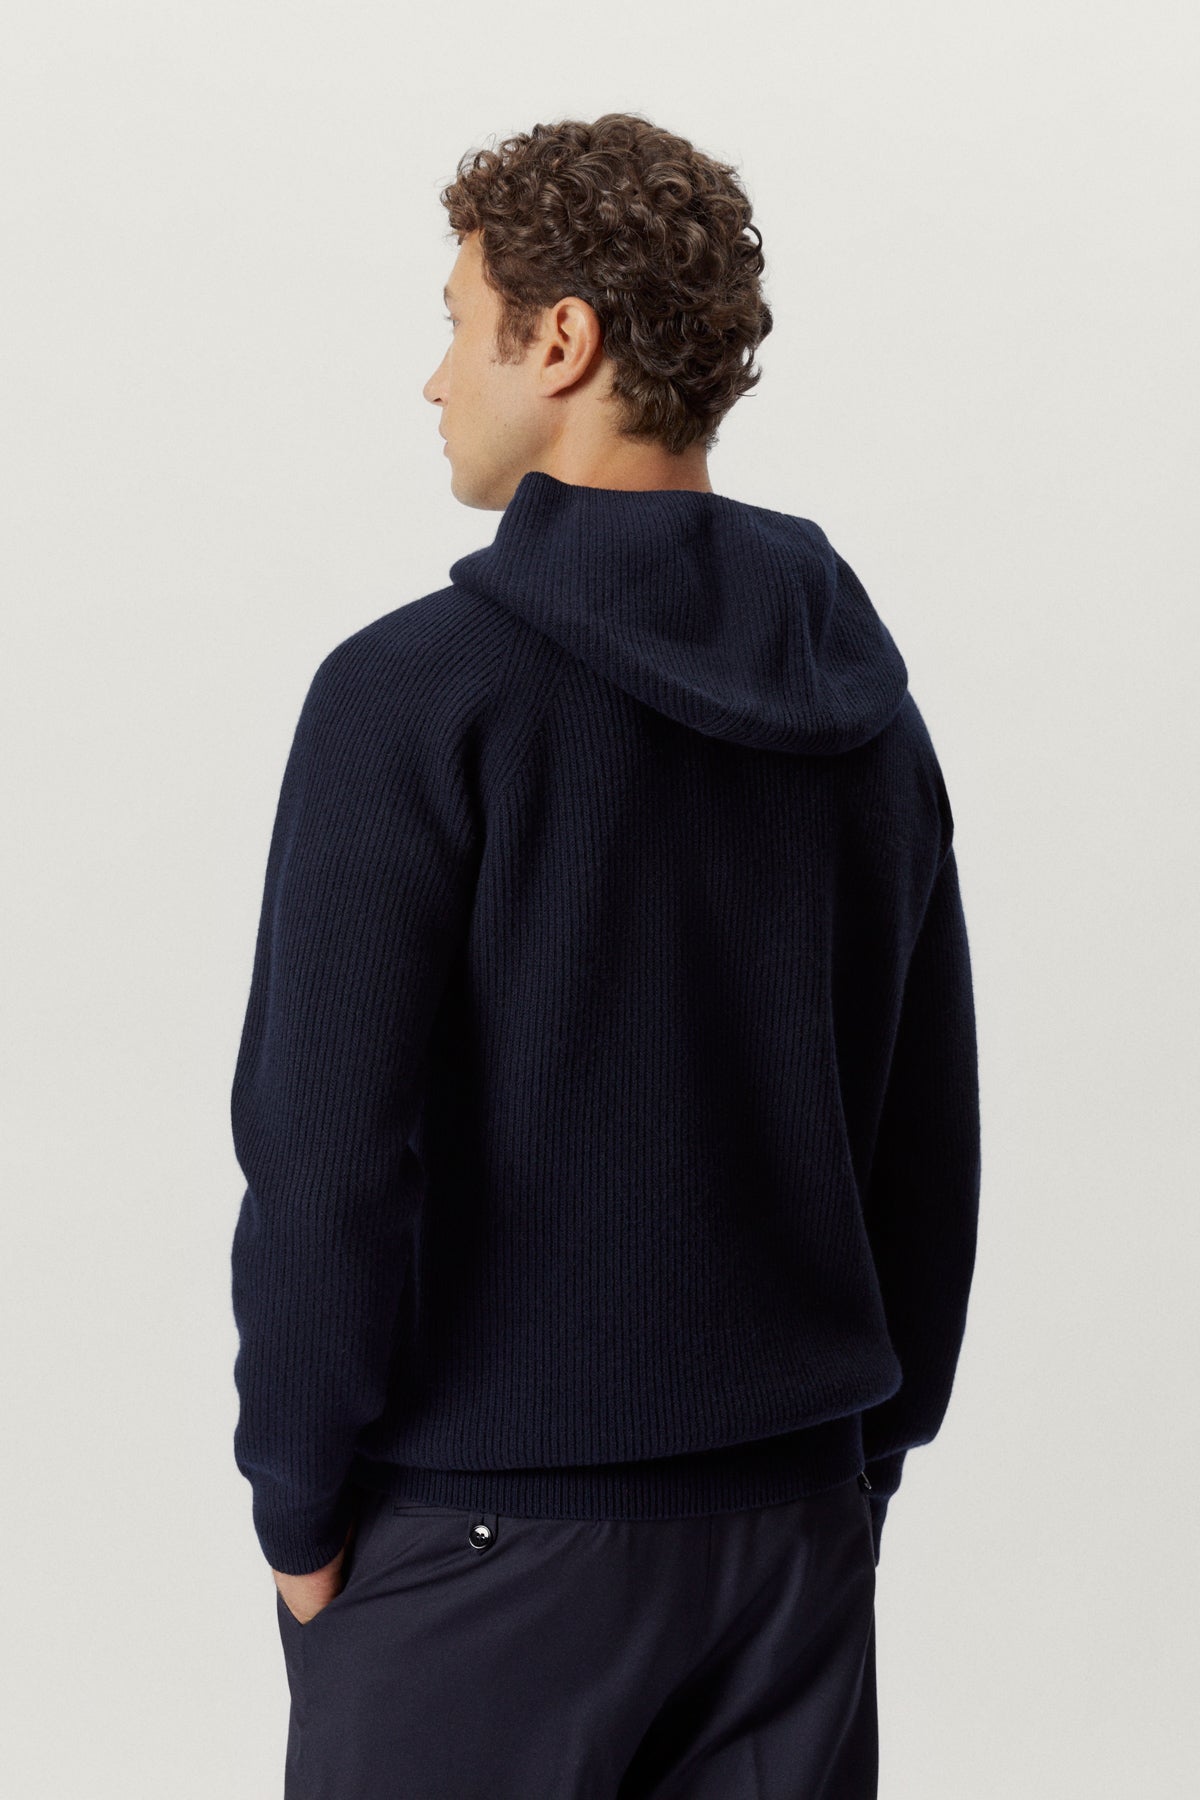 the woolen ribbed hoodie sweater blue navy